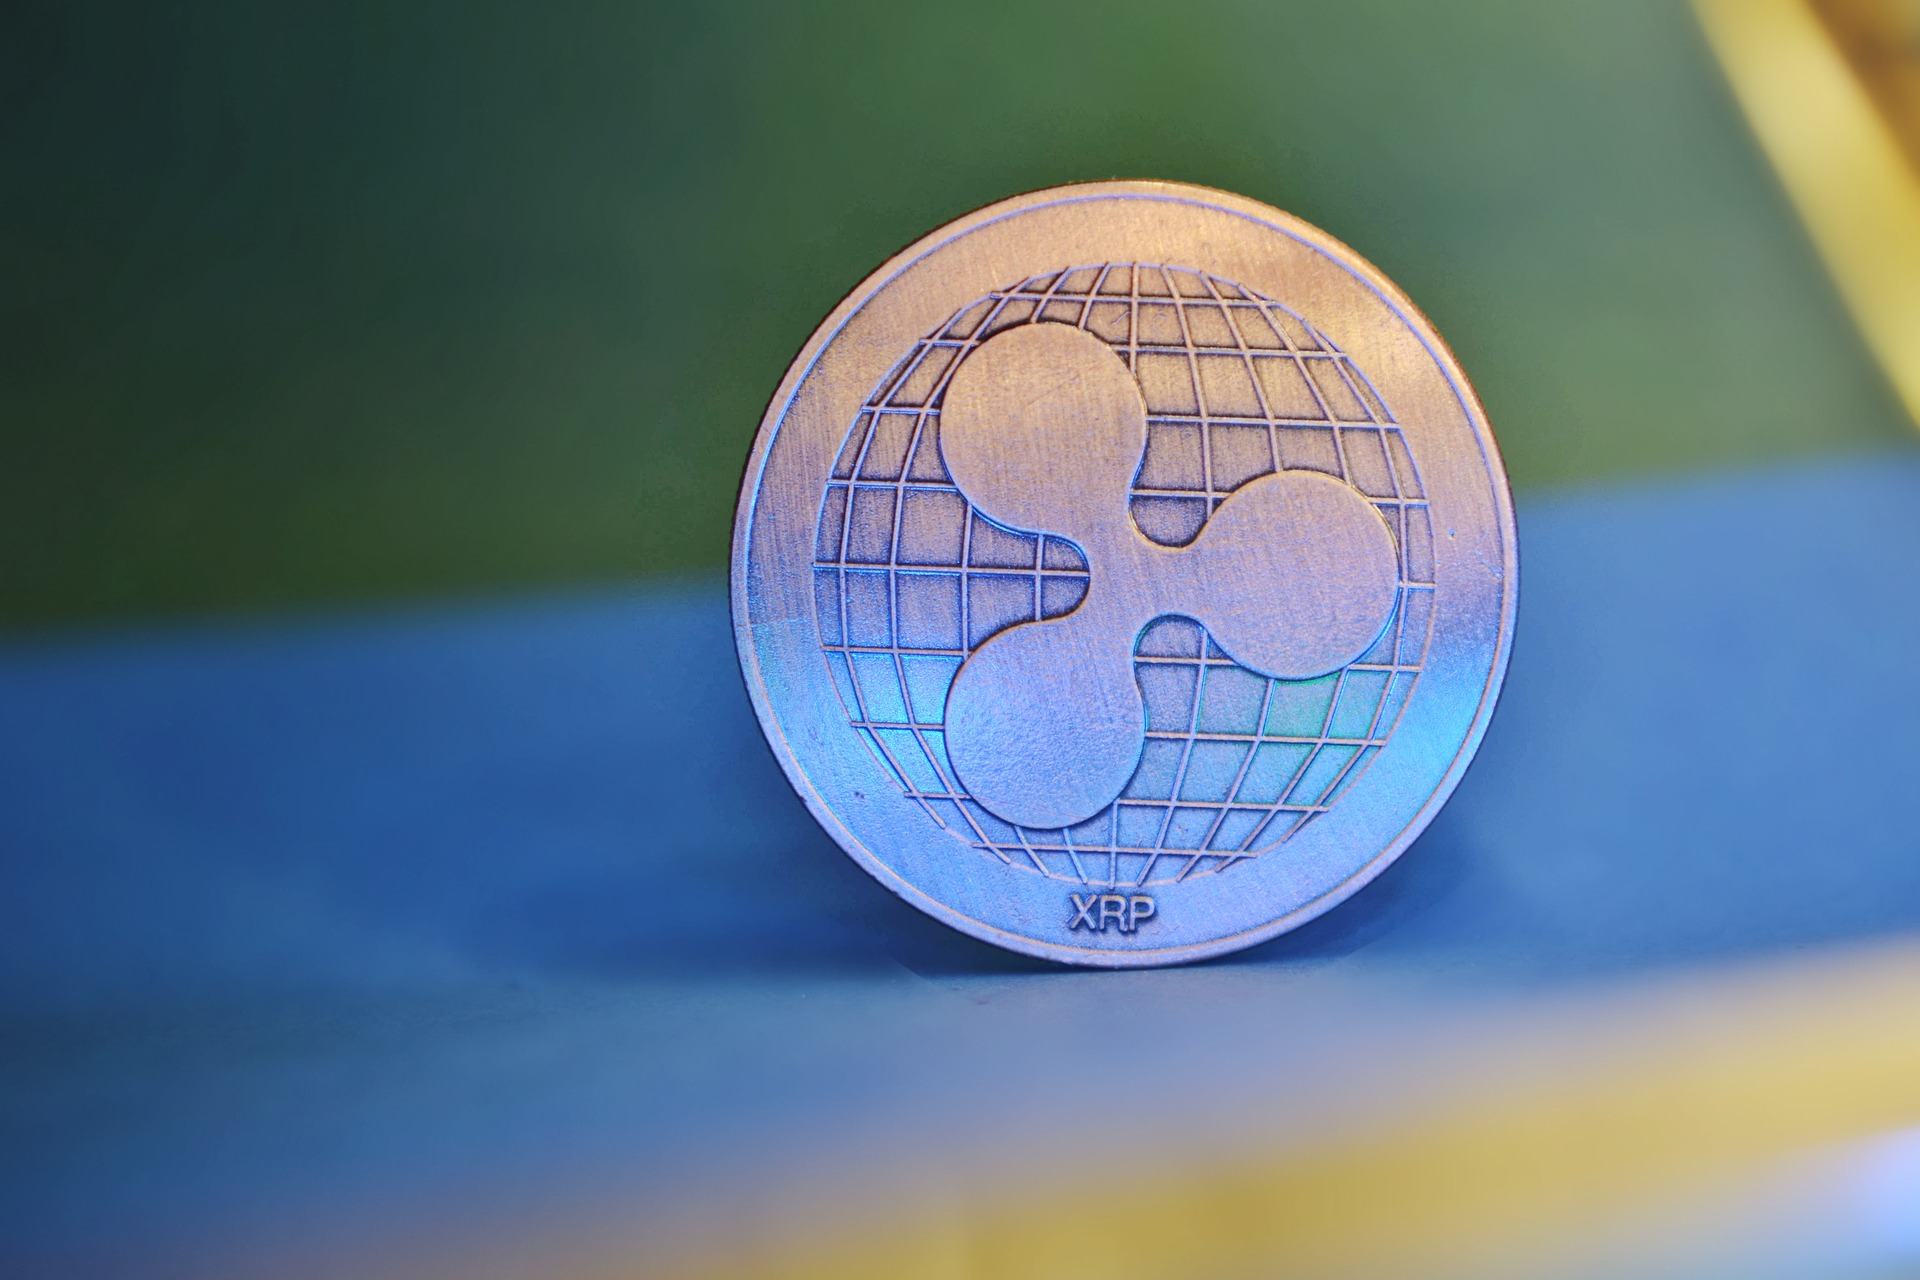 Ripple to Use Its Upcoming Stablecoin AND XRP in Cross-Border Payment Product, Says Senior Exec